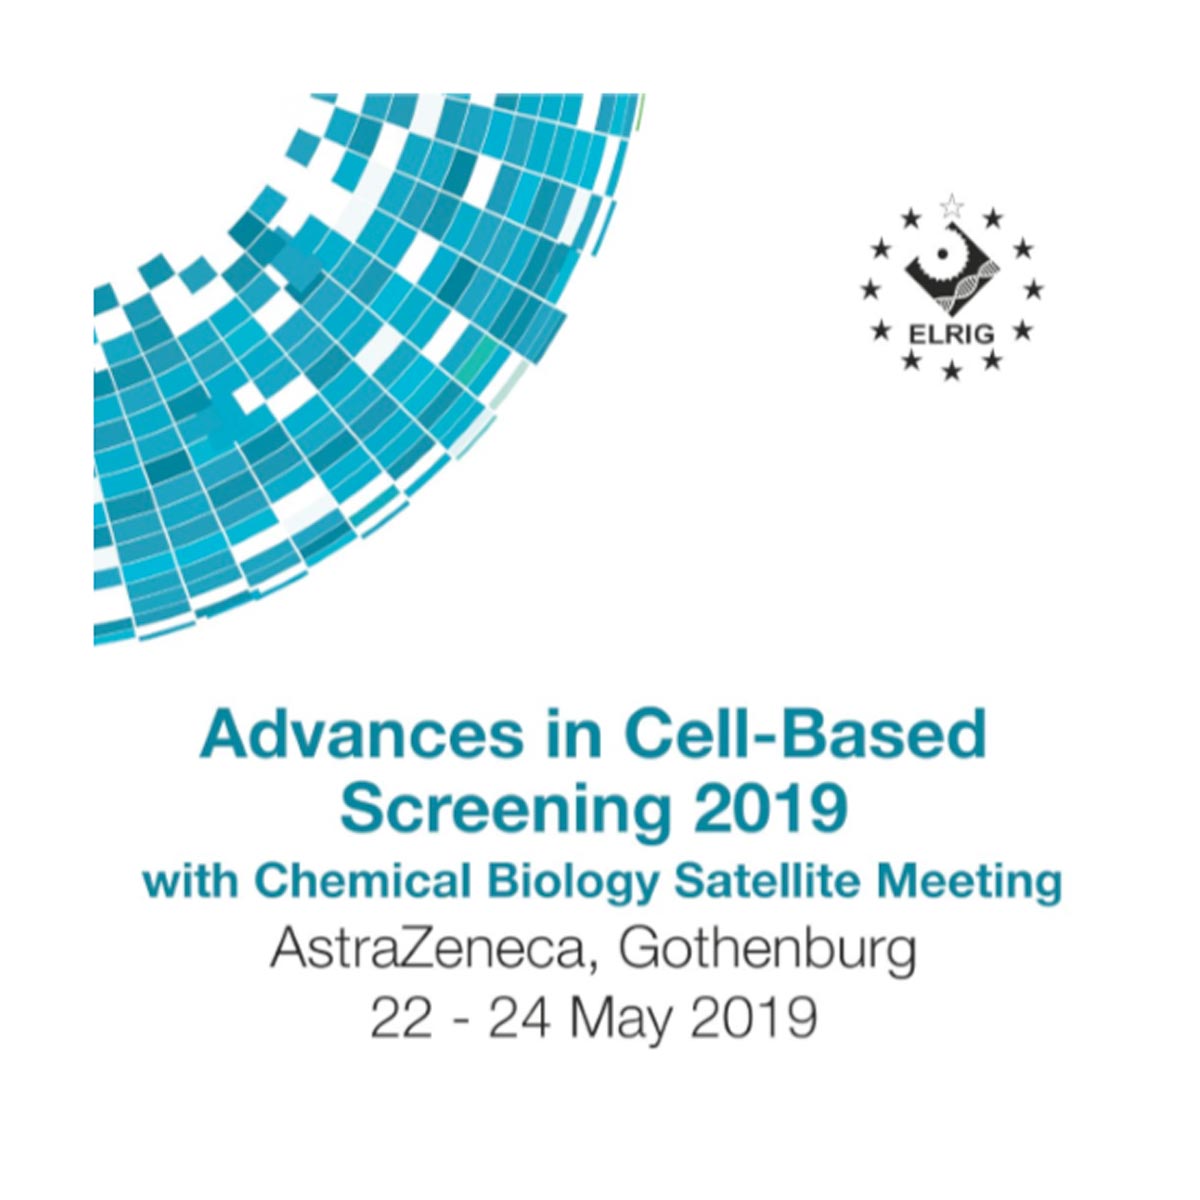 Advances in Cell-Based Screening 2019